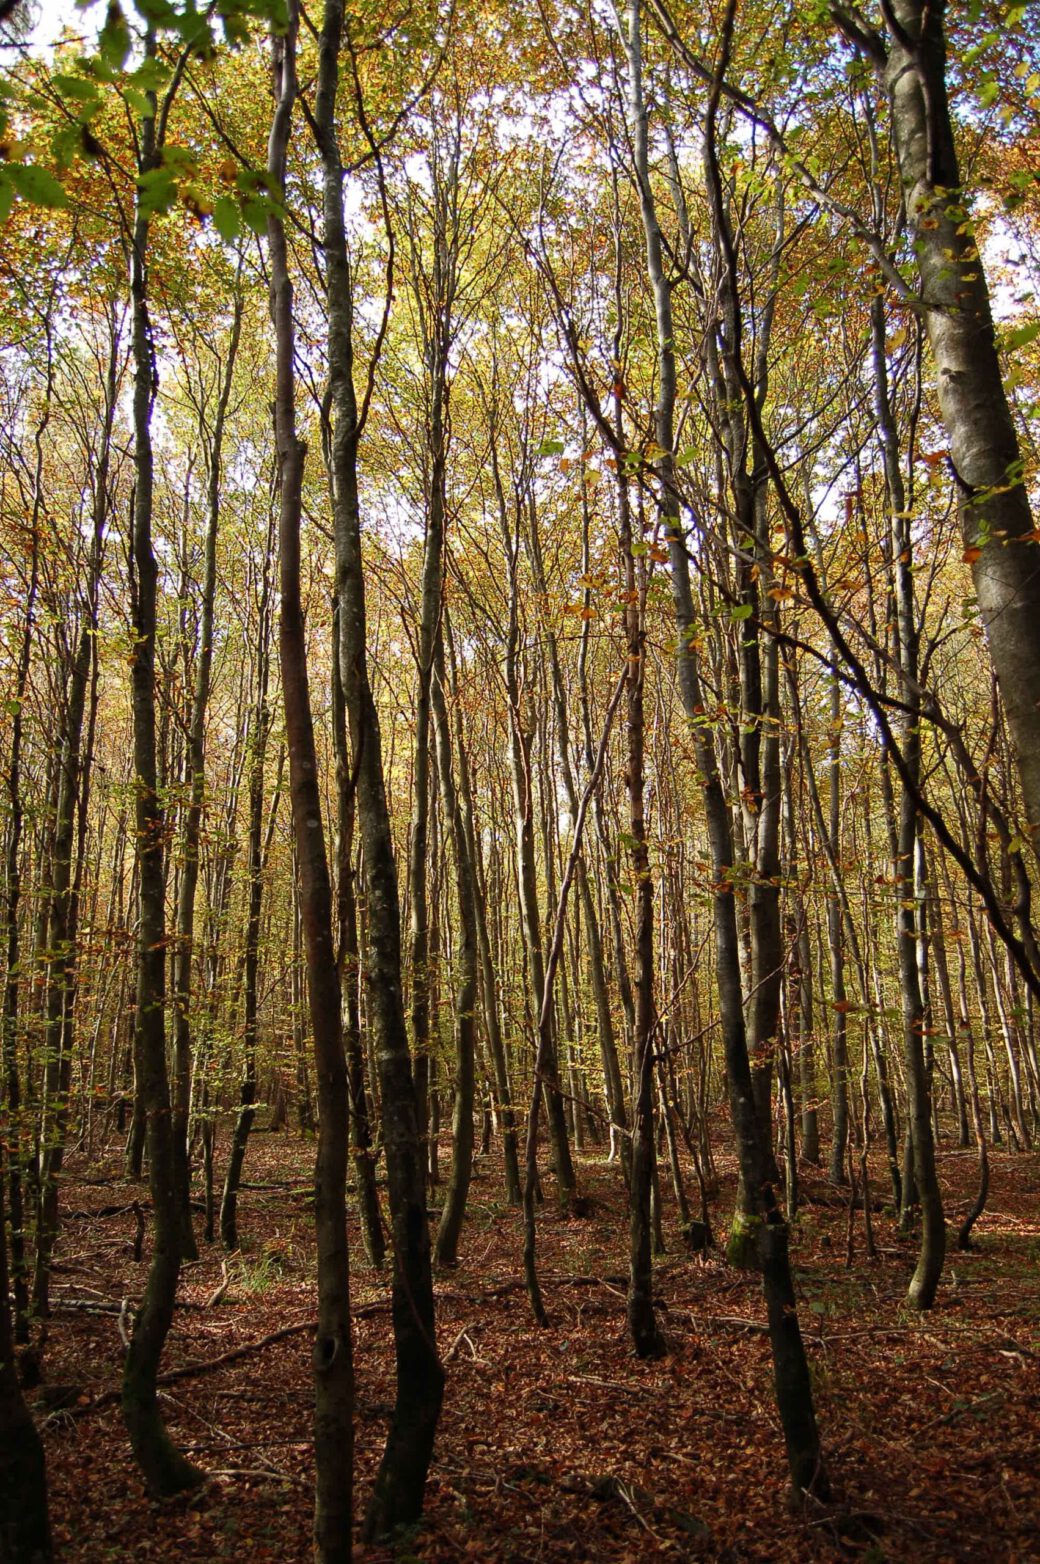 Picture: The photo shows an autumnal forest with beech trees in the young stand age class